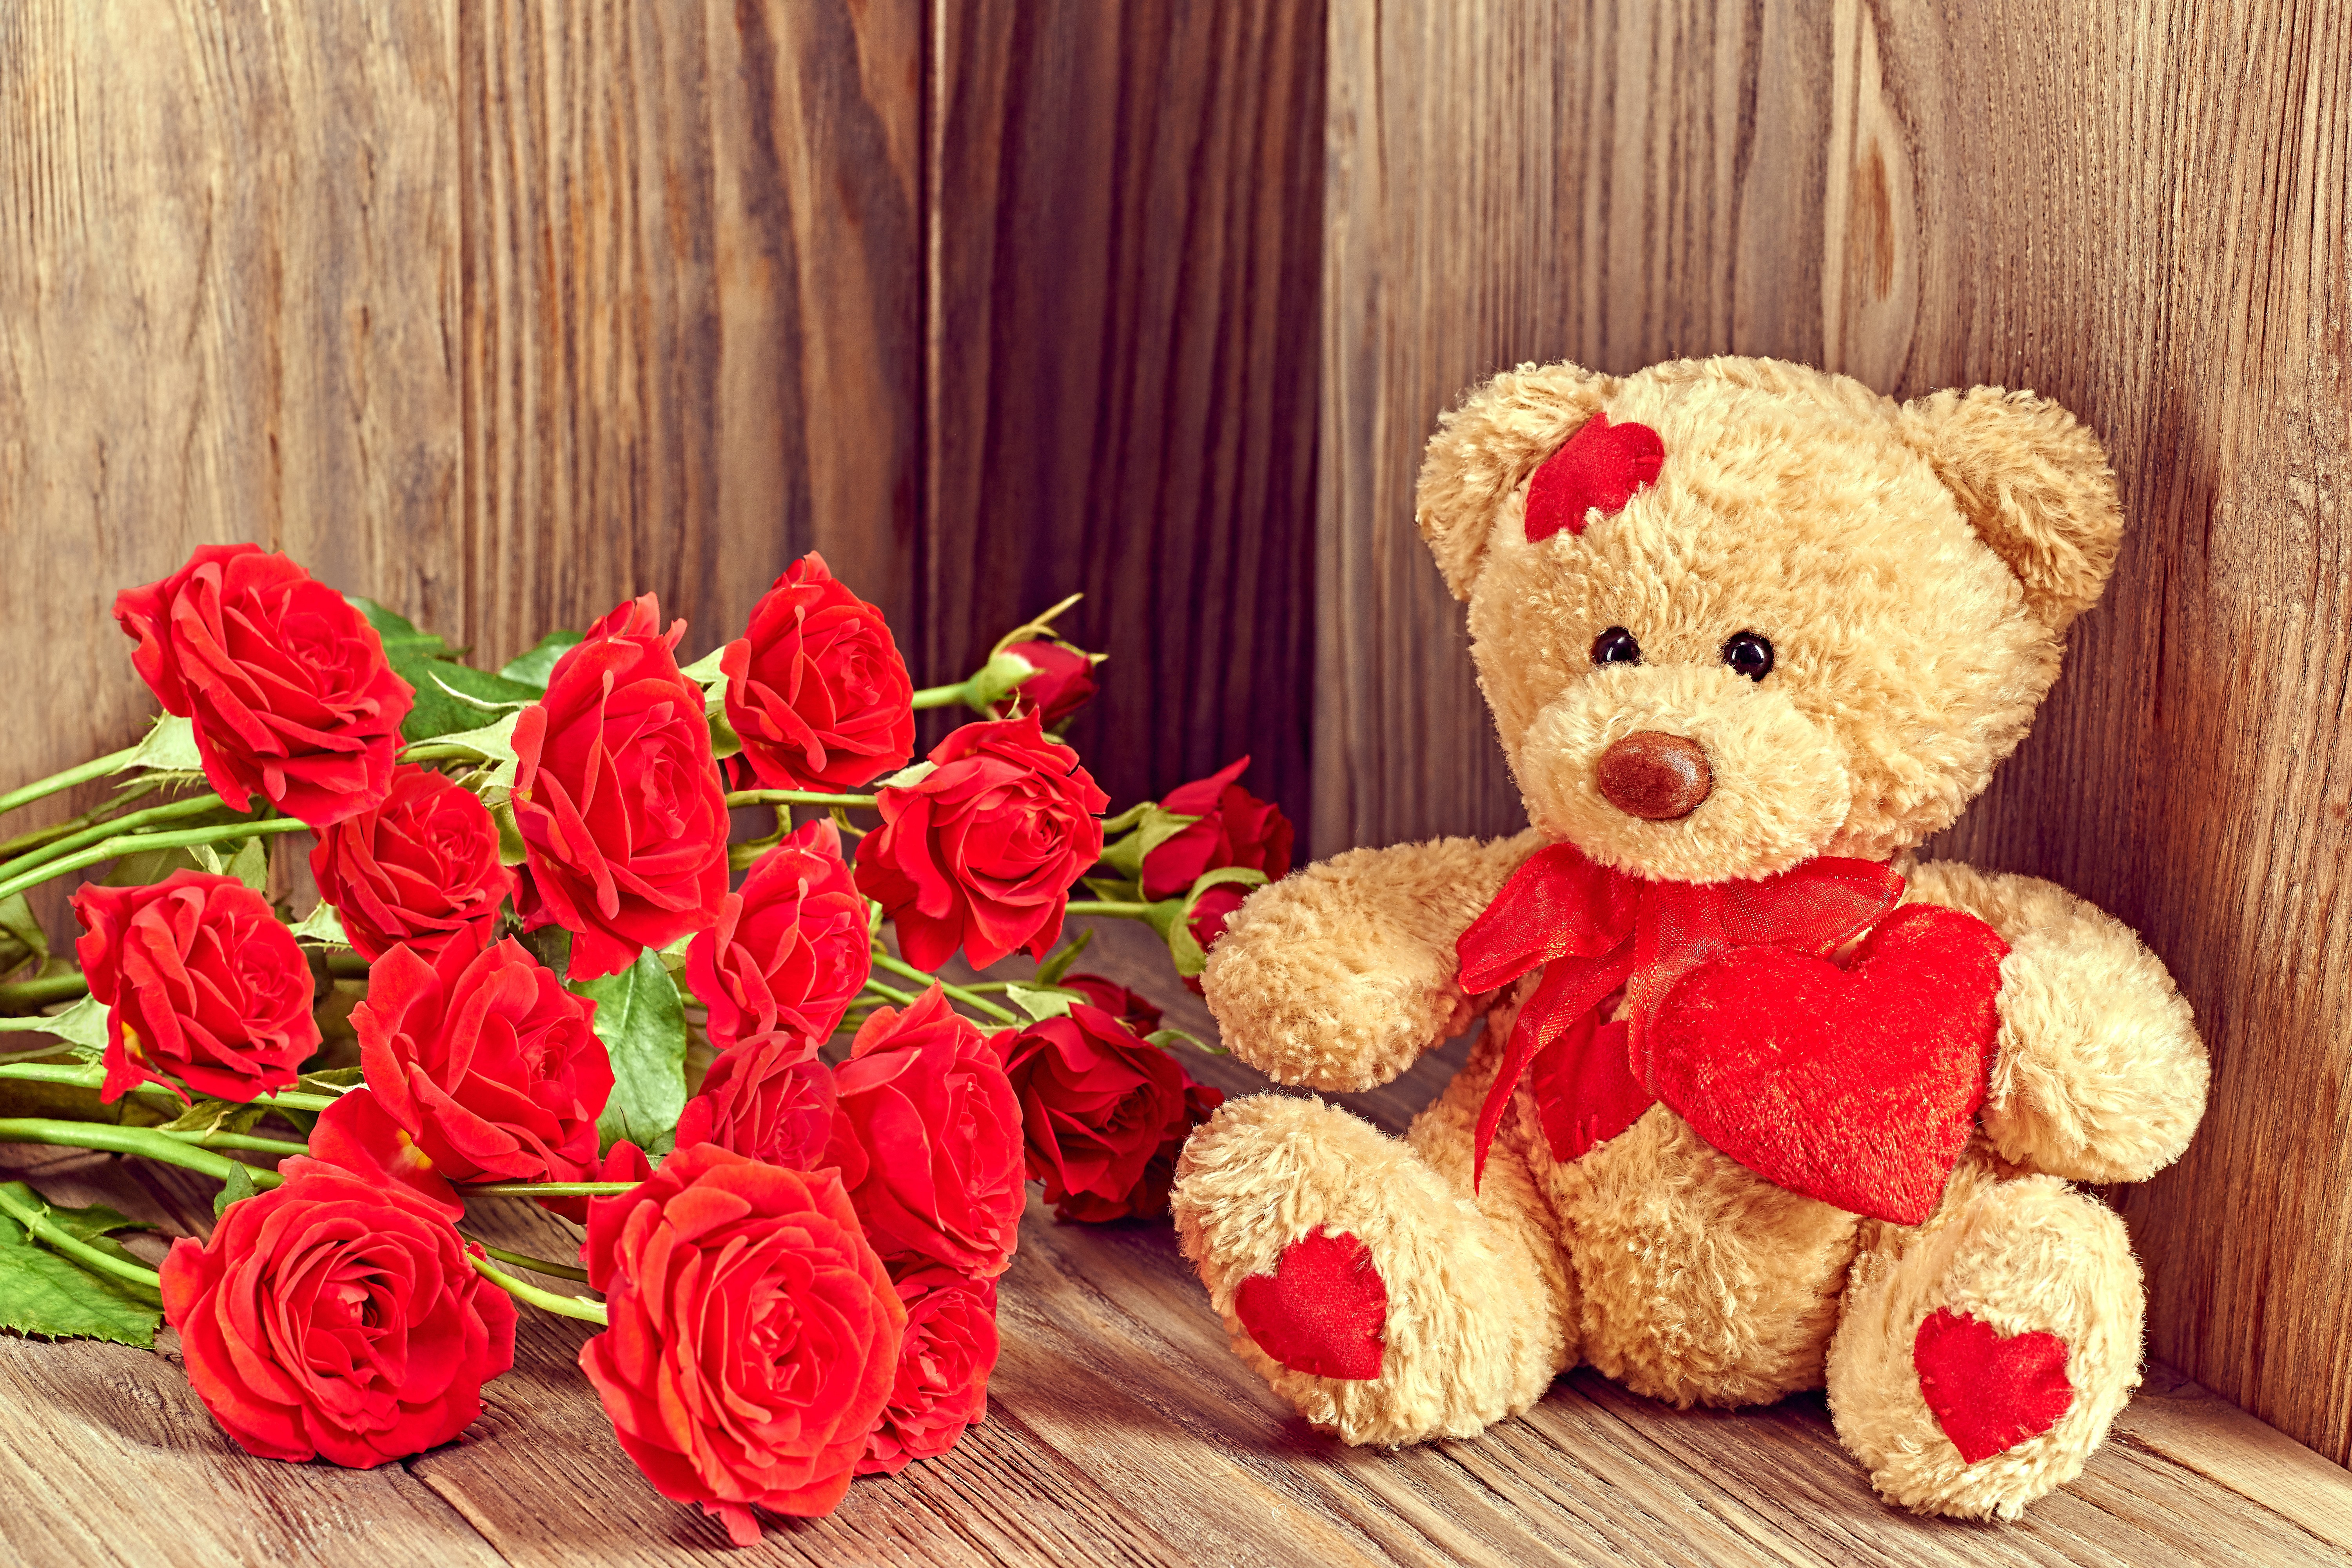 Image: Teddy, bear, toy, soft, roses, flowers, red, heart, ribbon, Valentine's Day, love